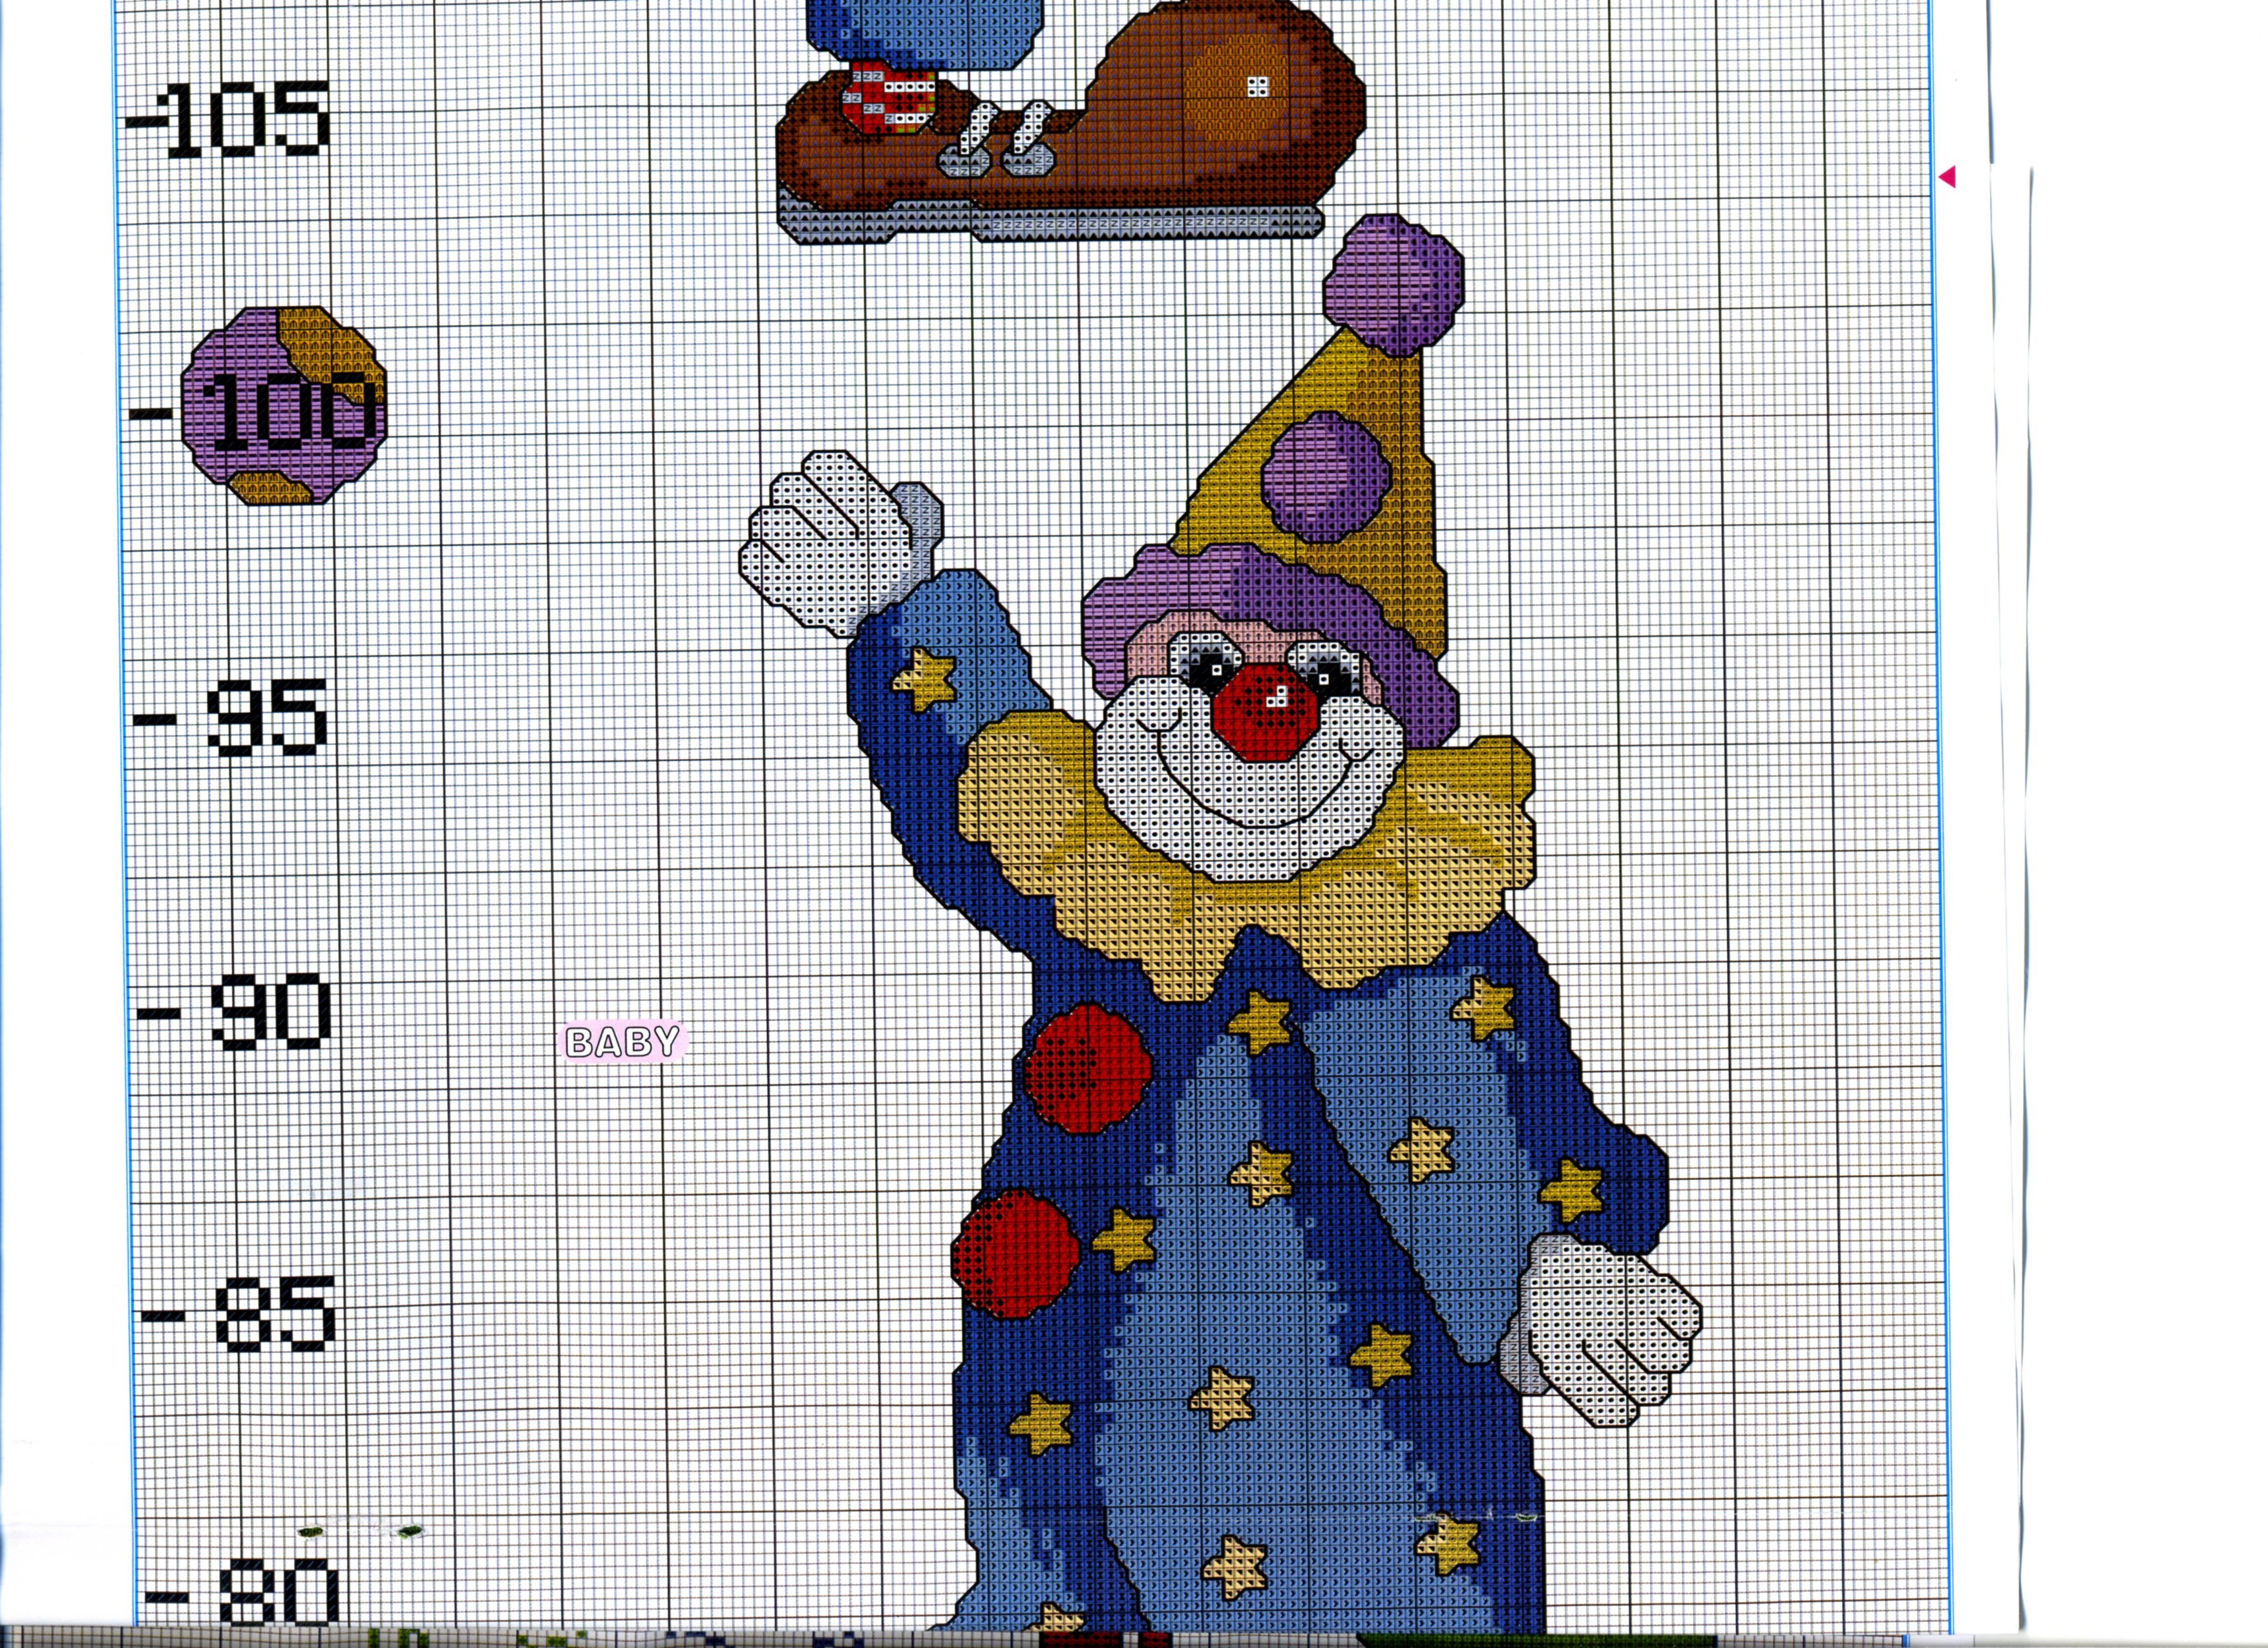 Height chart with clowns (4)